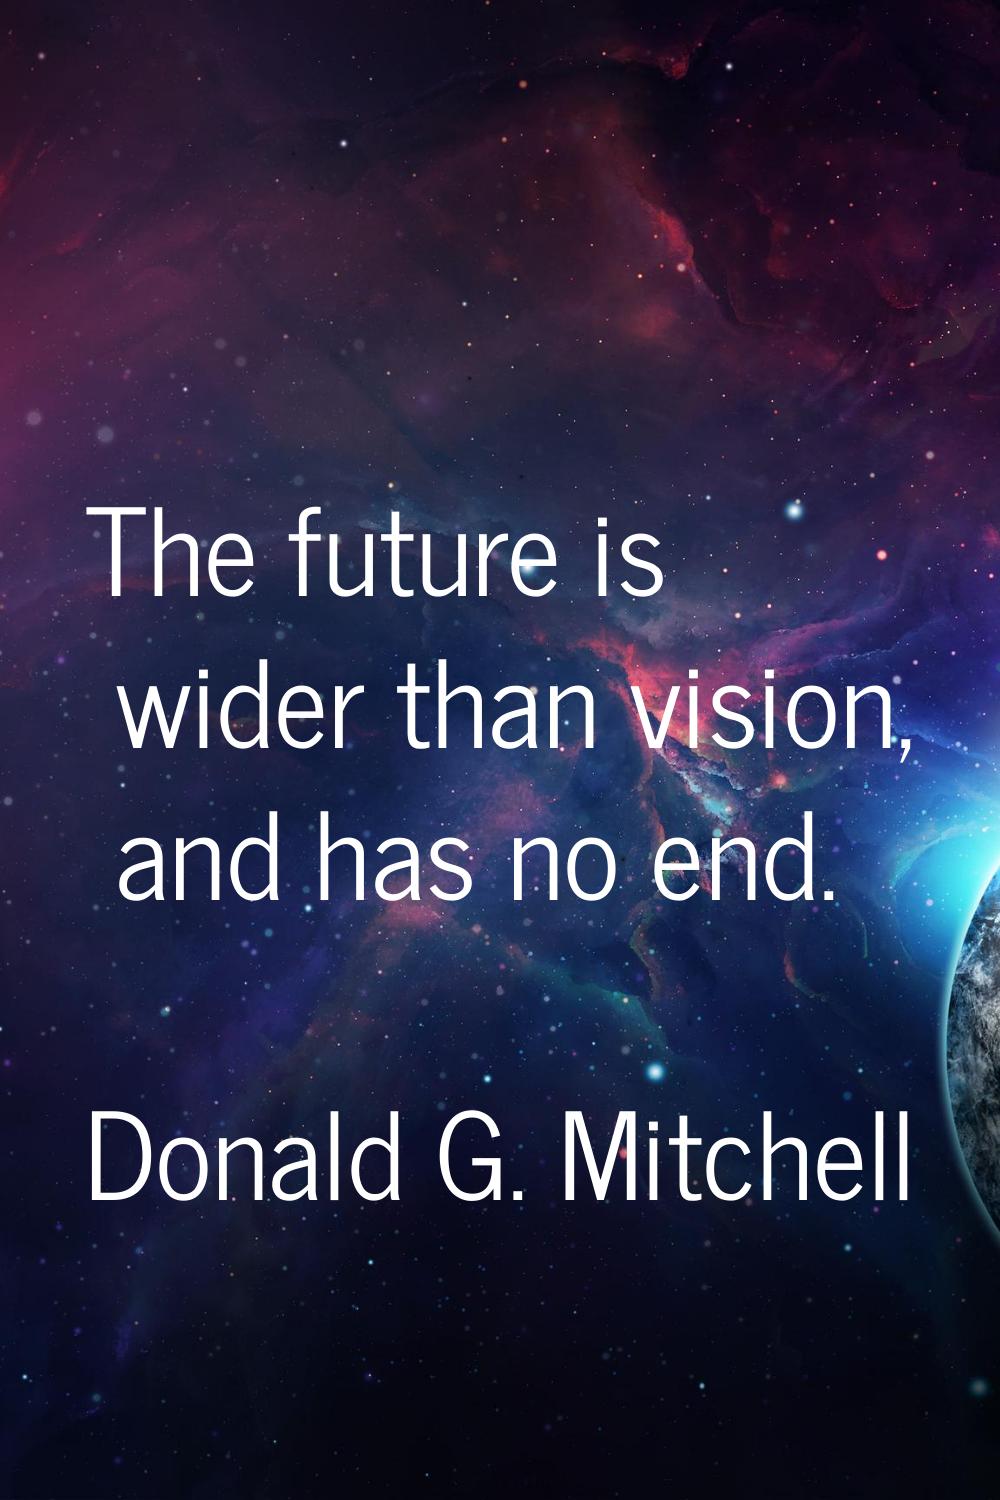 The future is wider than vision, and has no end.